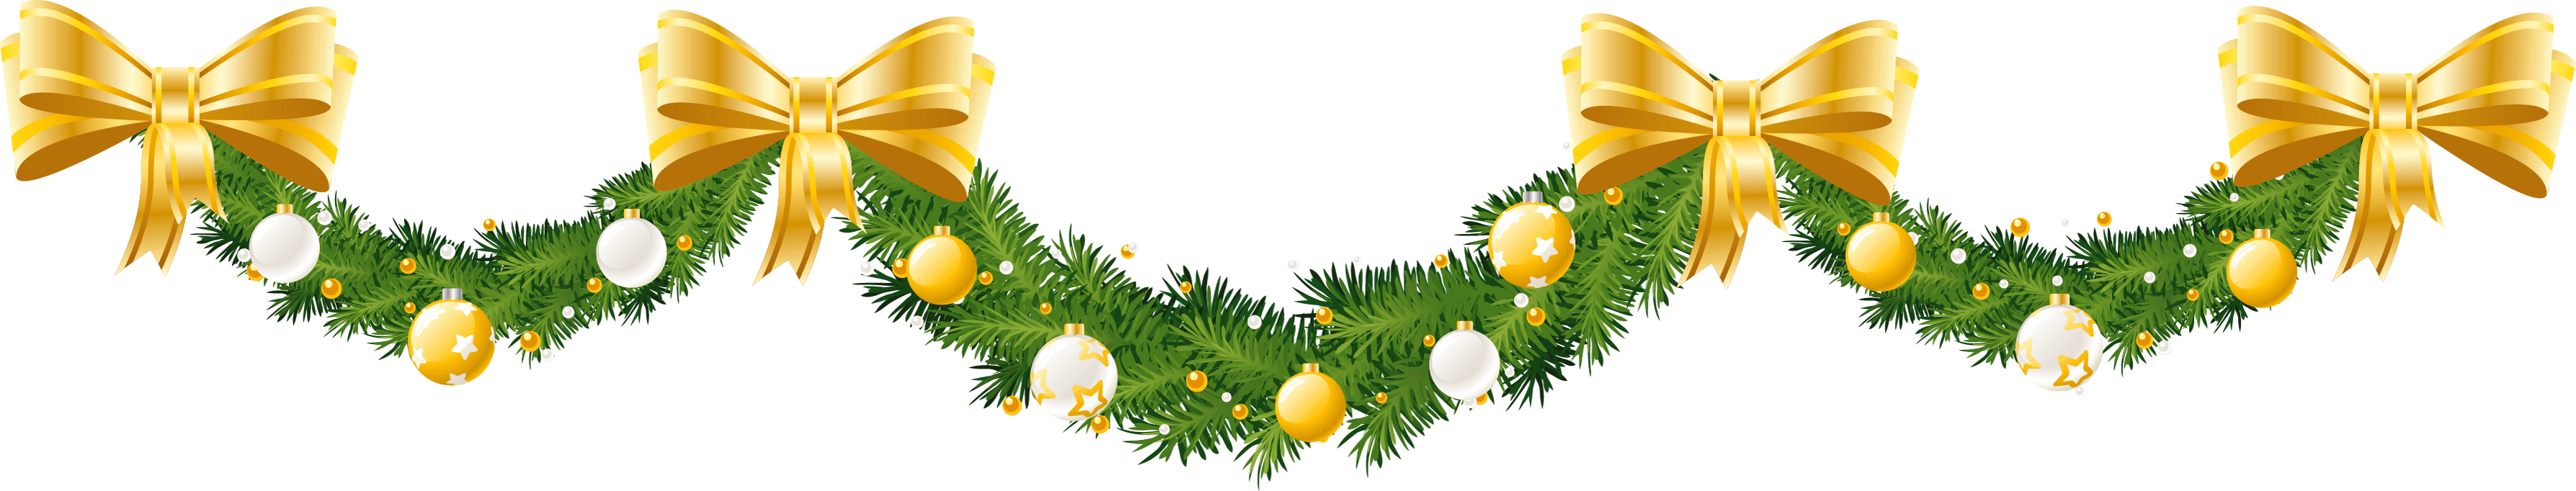 Christmas Ornament PNG HD and HQ Image